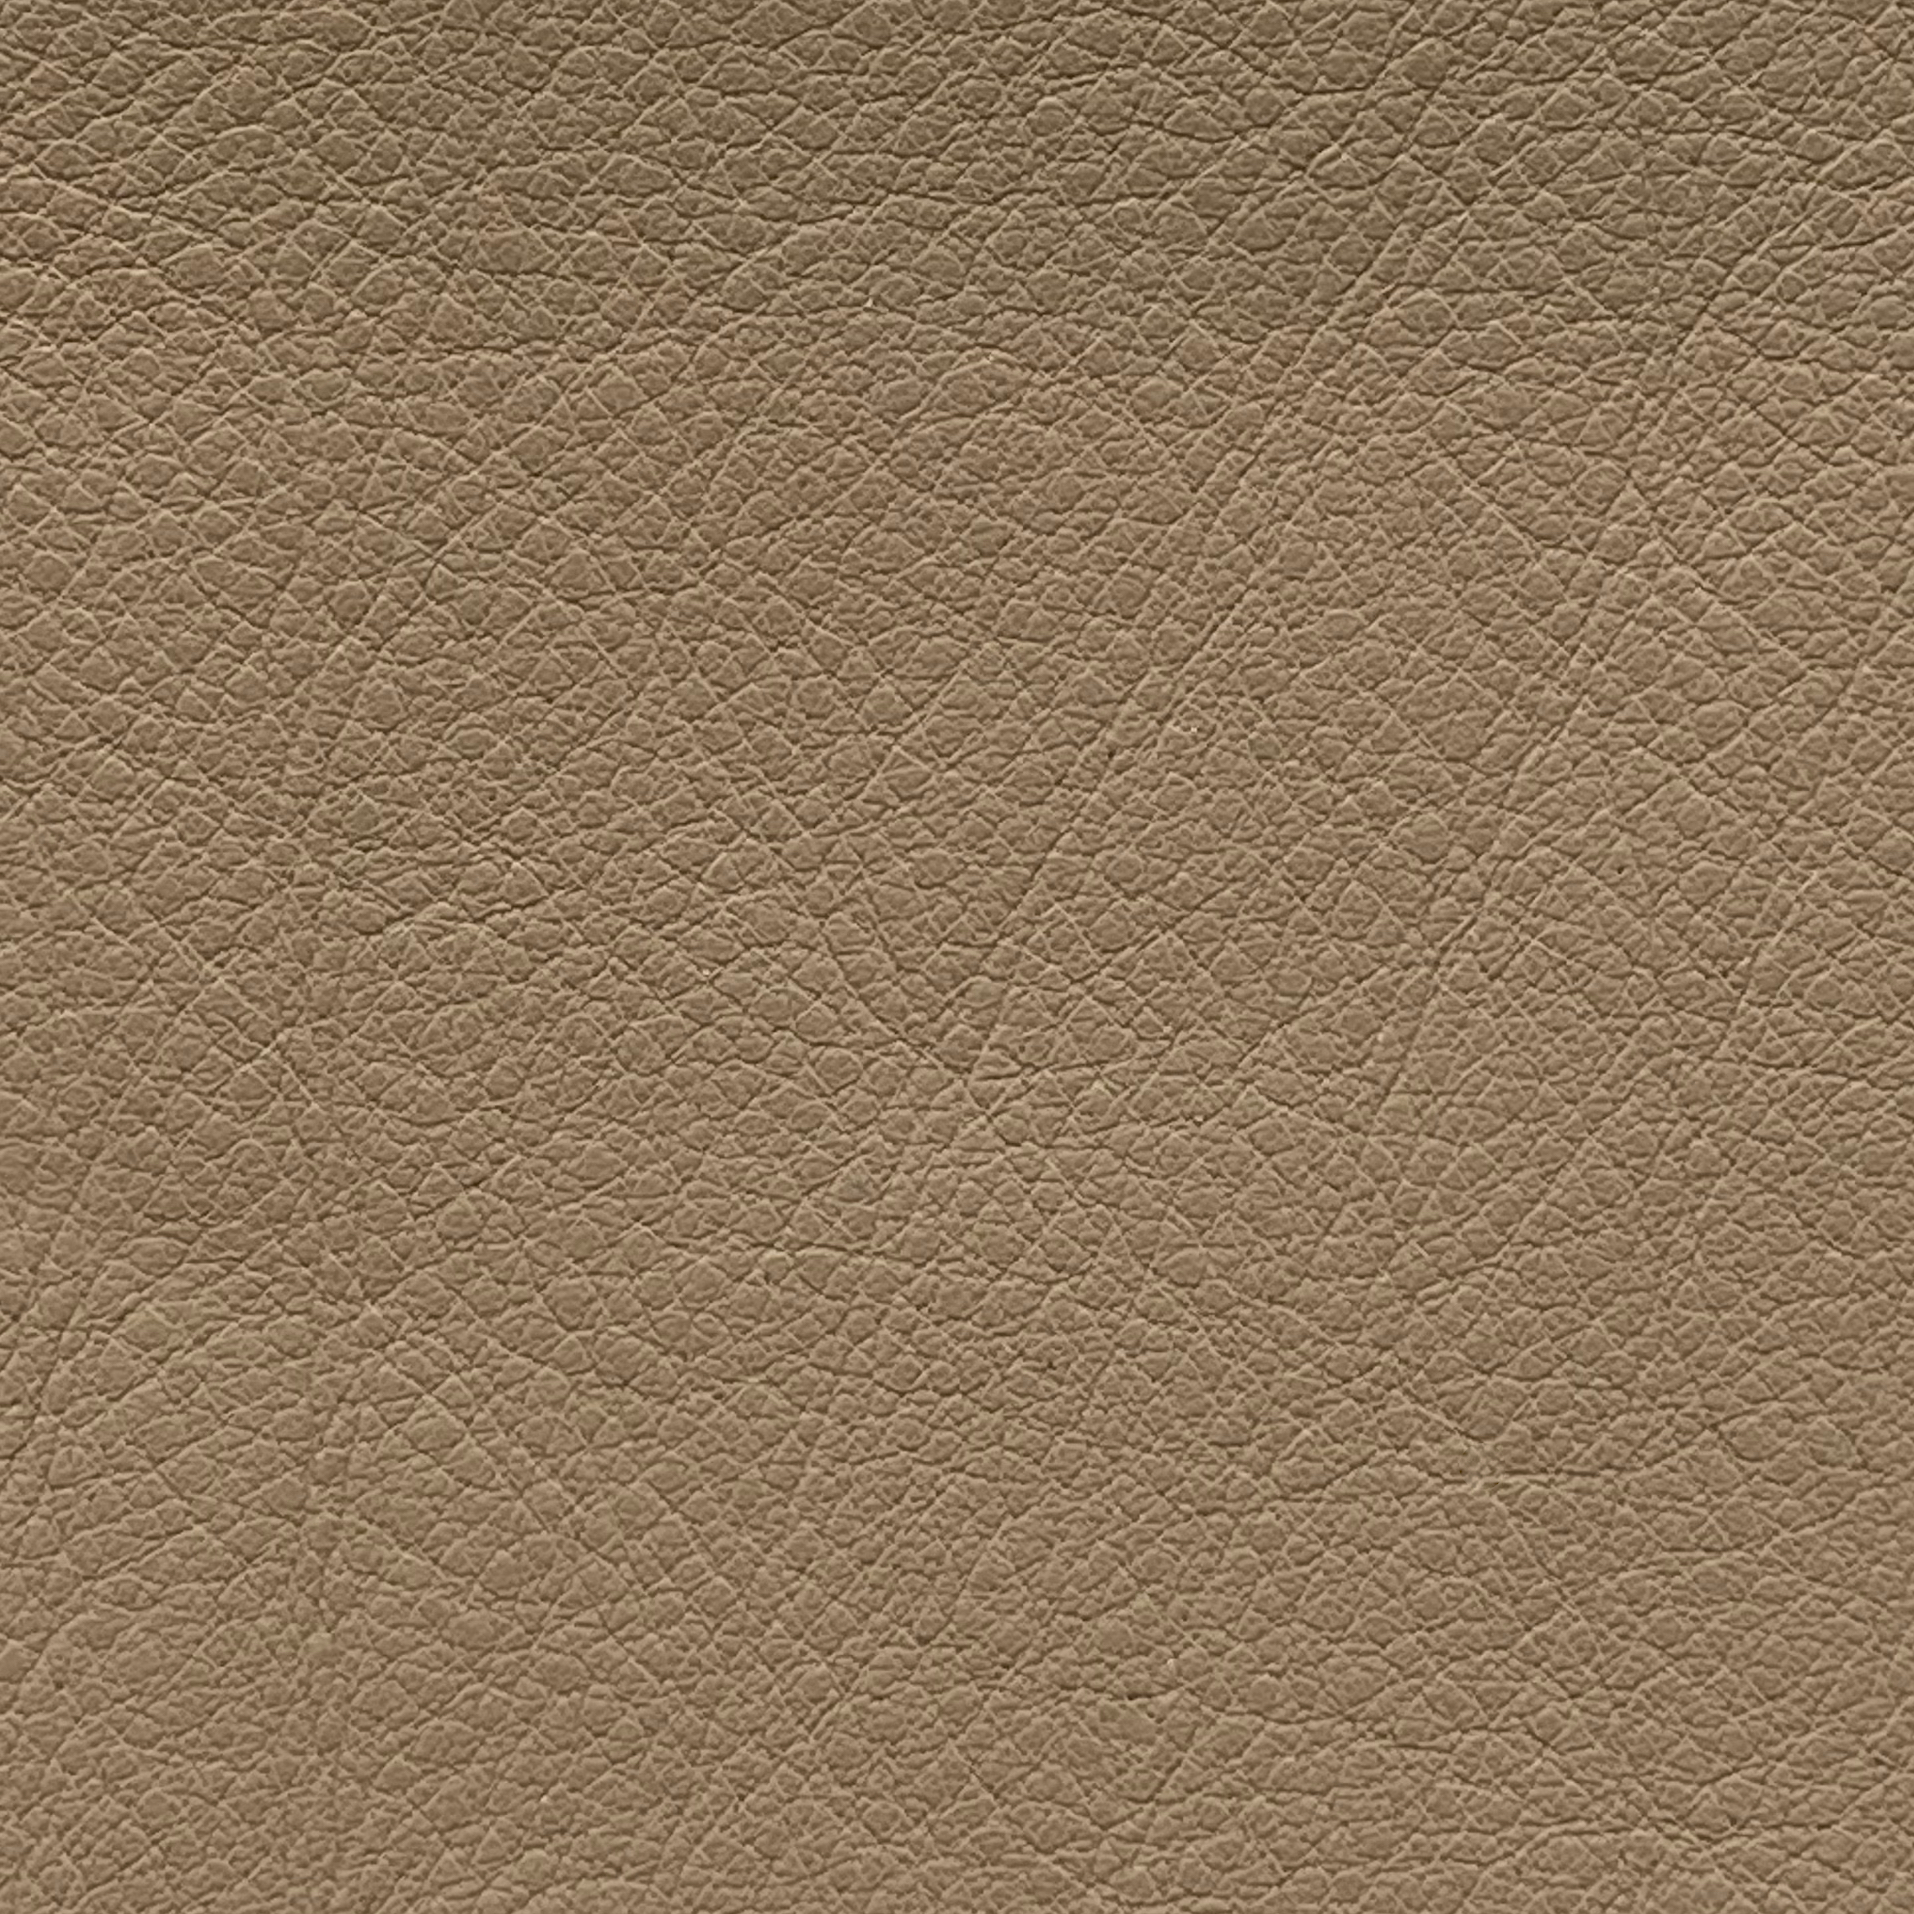 Leather Product: DV 2028